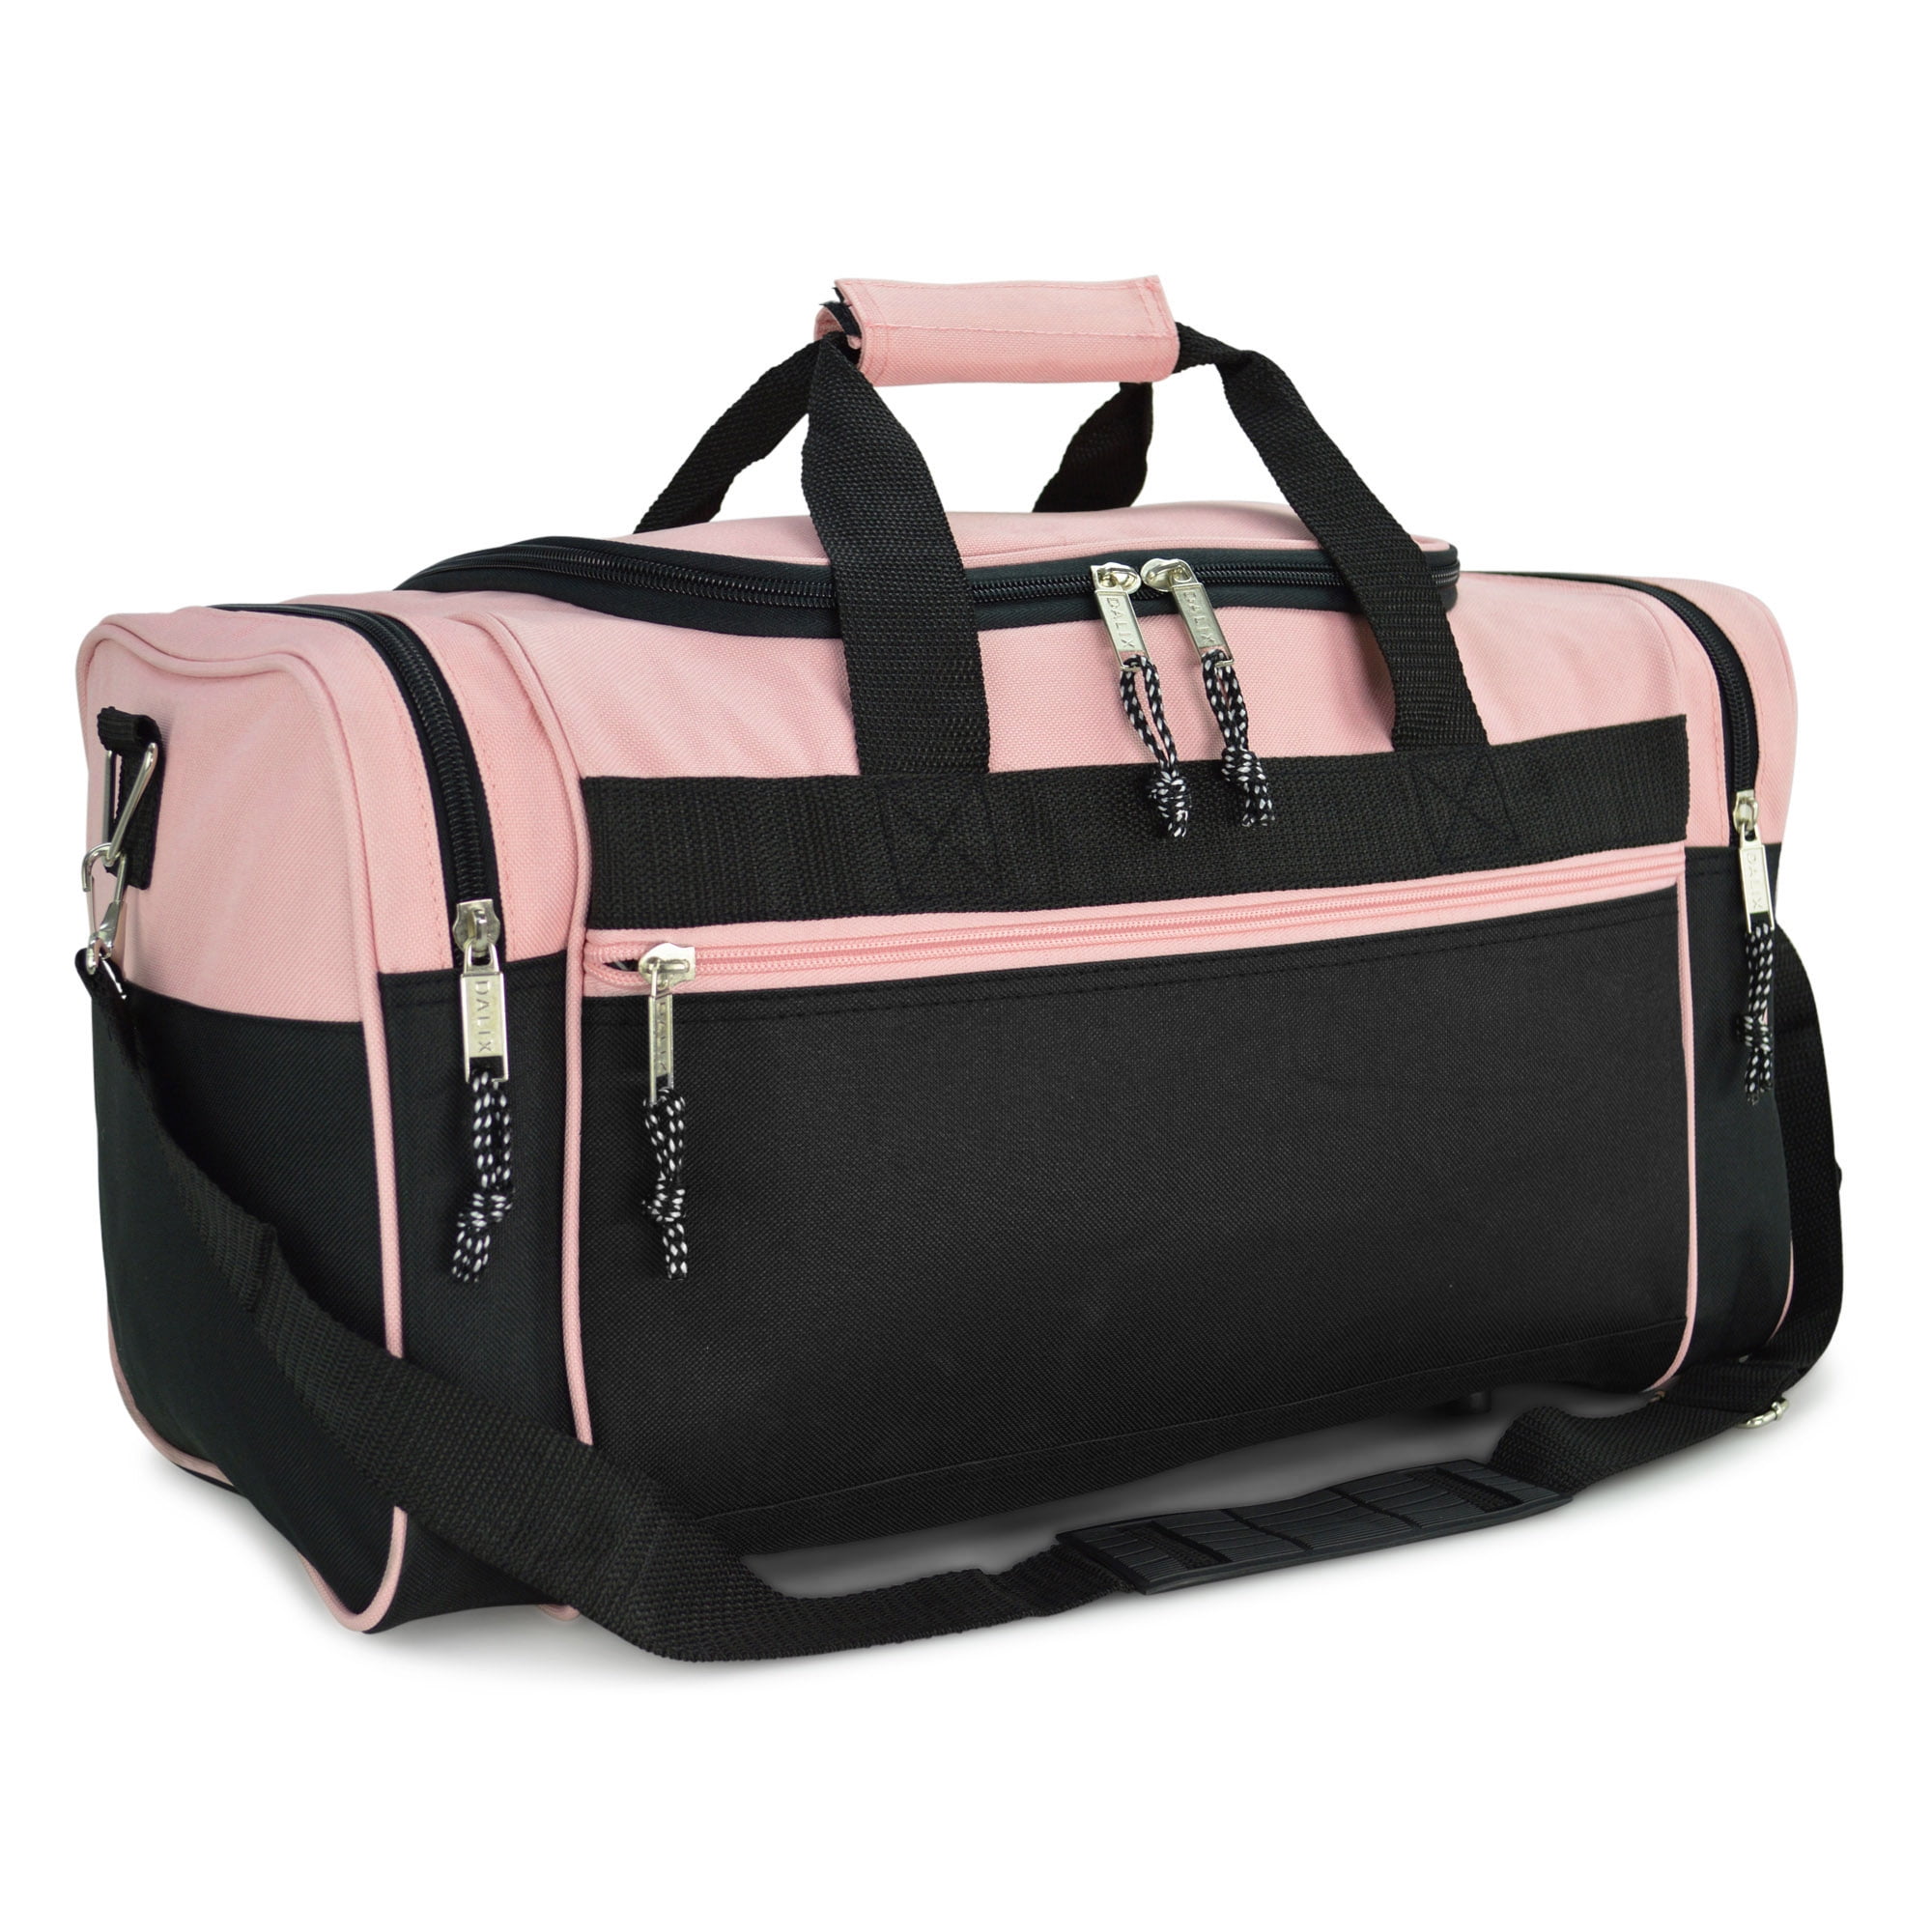 total sports travel bags